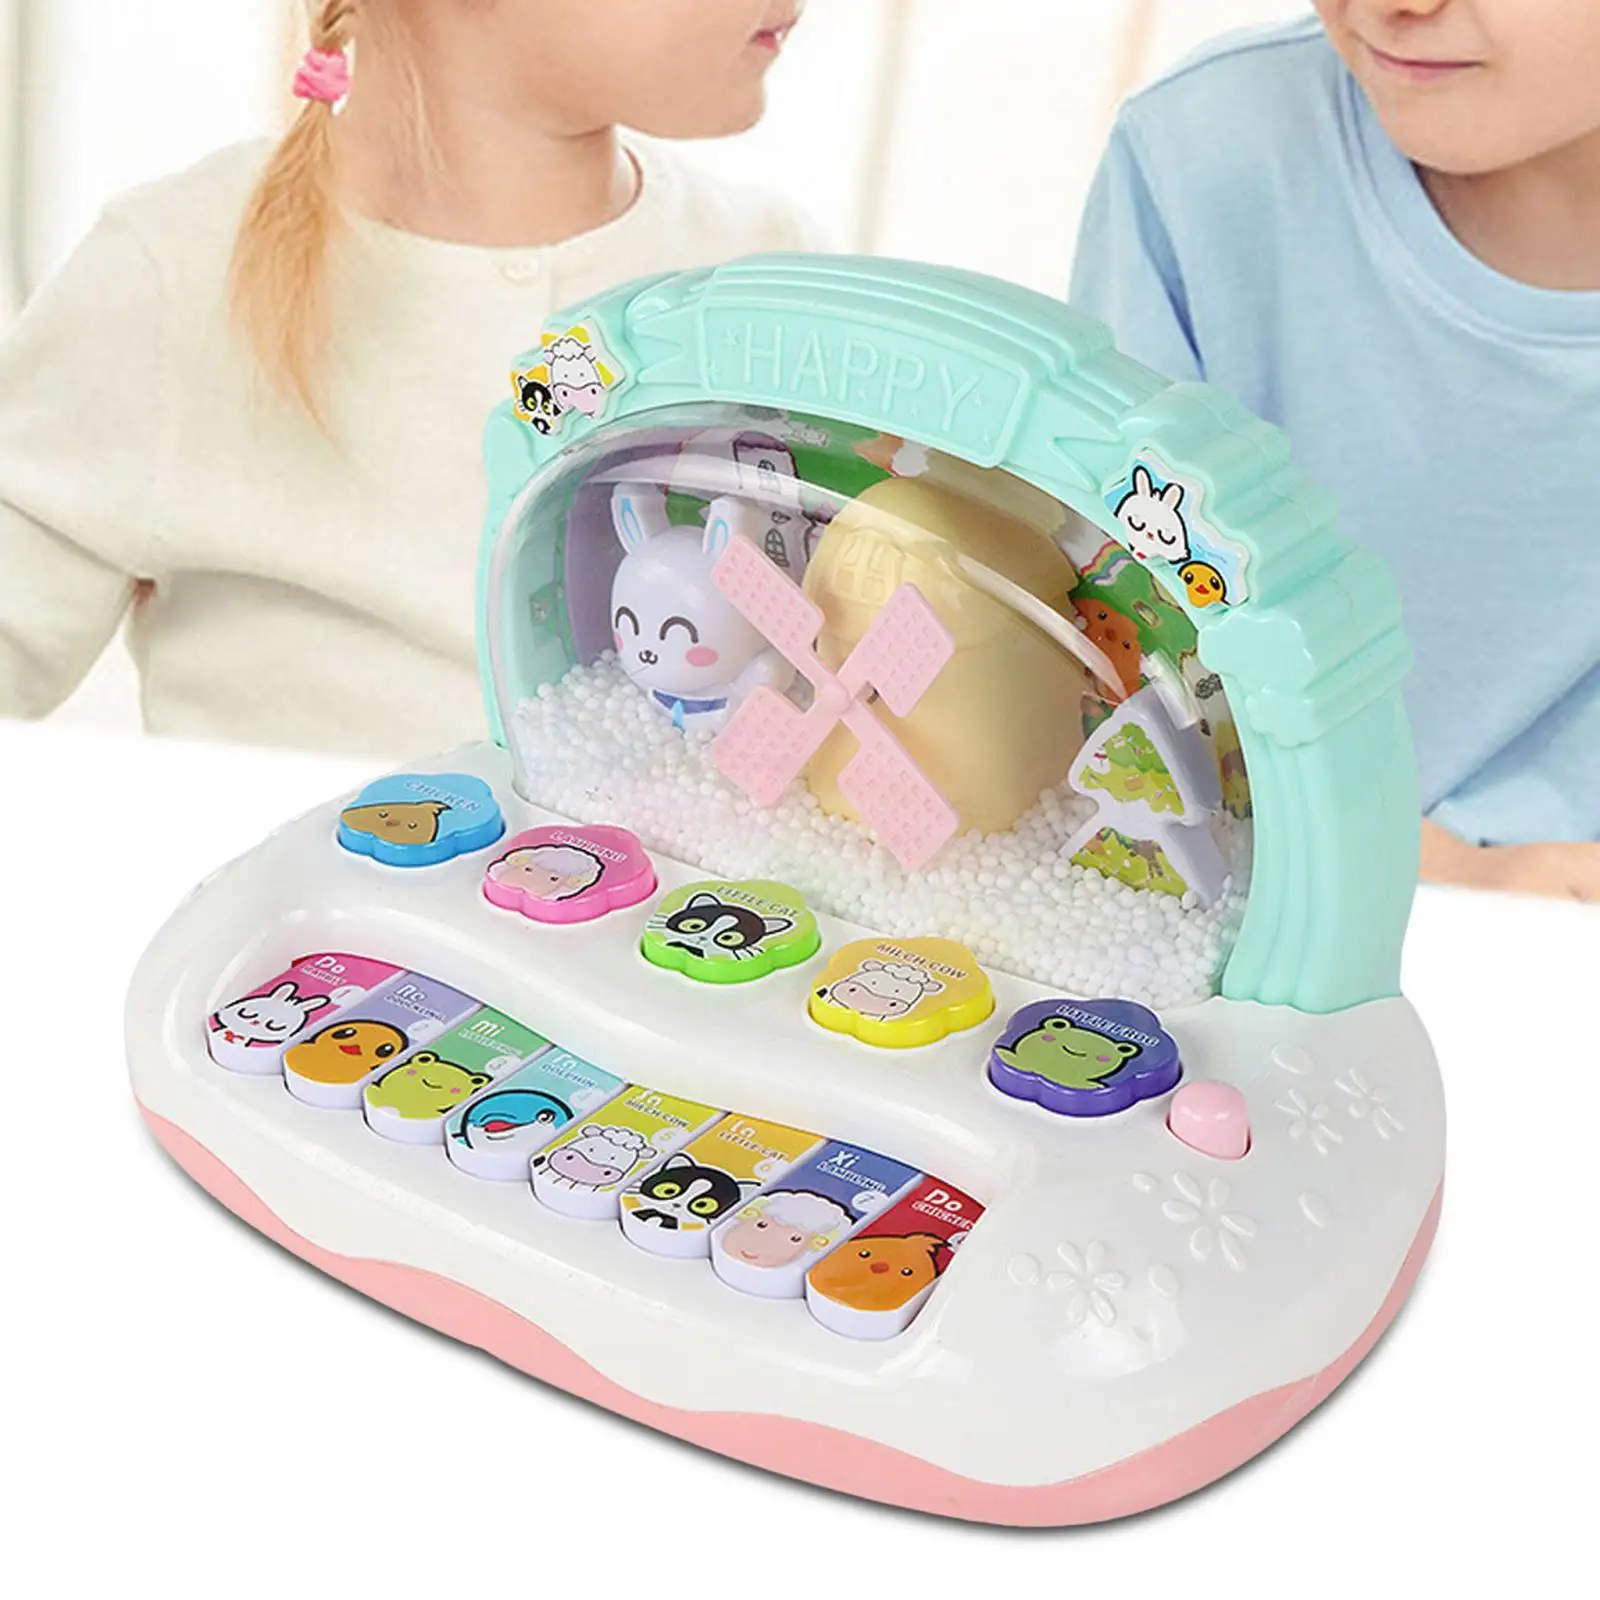 Musical Piano Toy Early Learning 8 Keys Entertainment Portable Piano Plays Music for Kids Baby Ages 2+ Birthday Gift Boys Girls